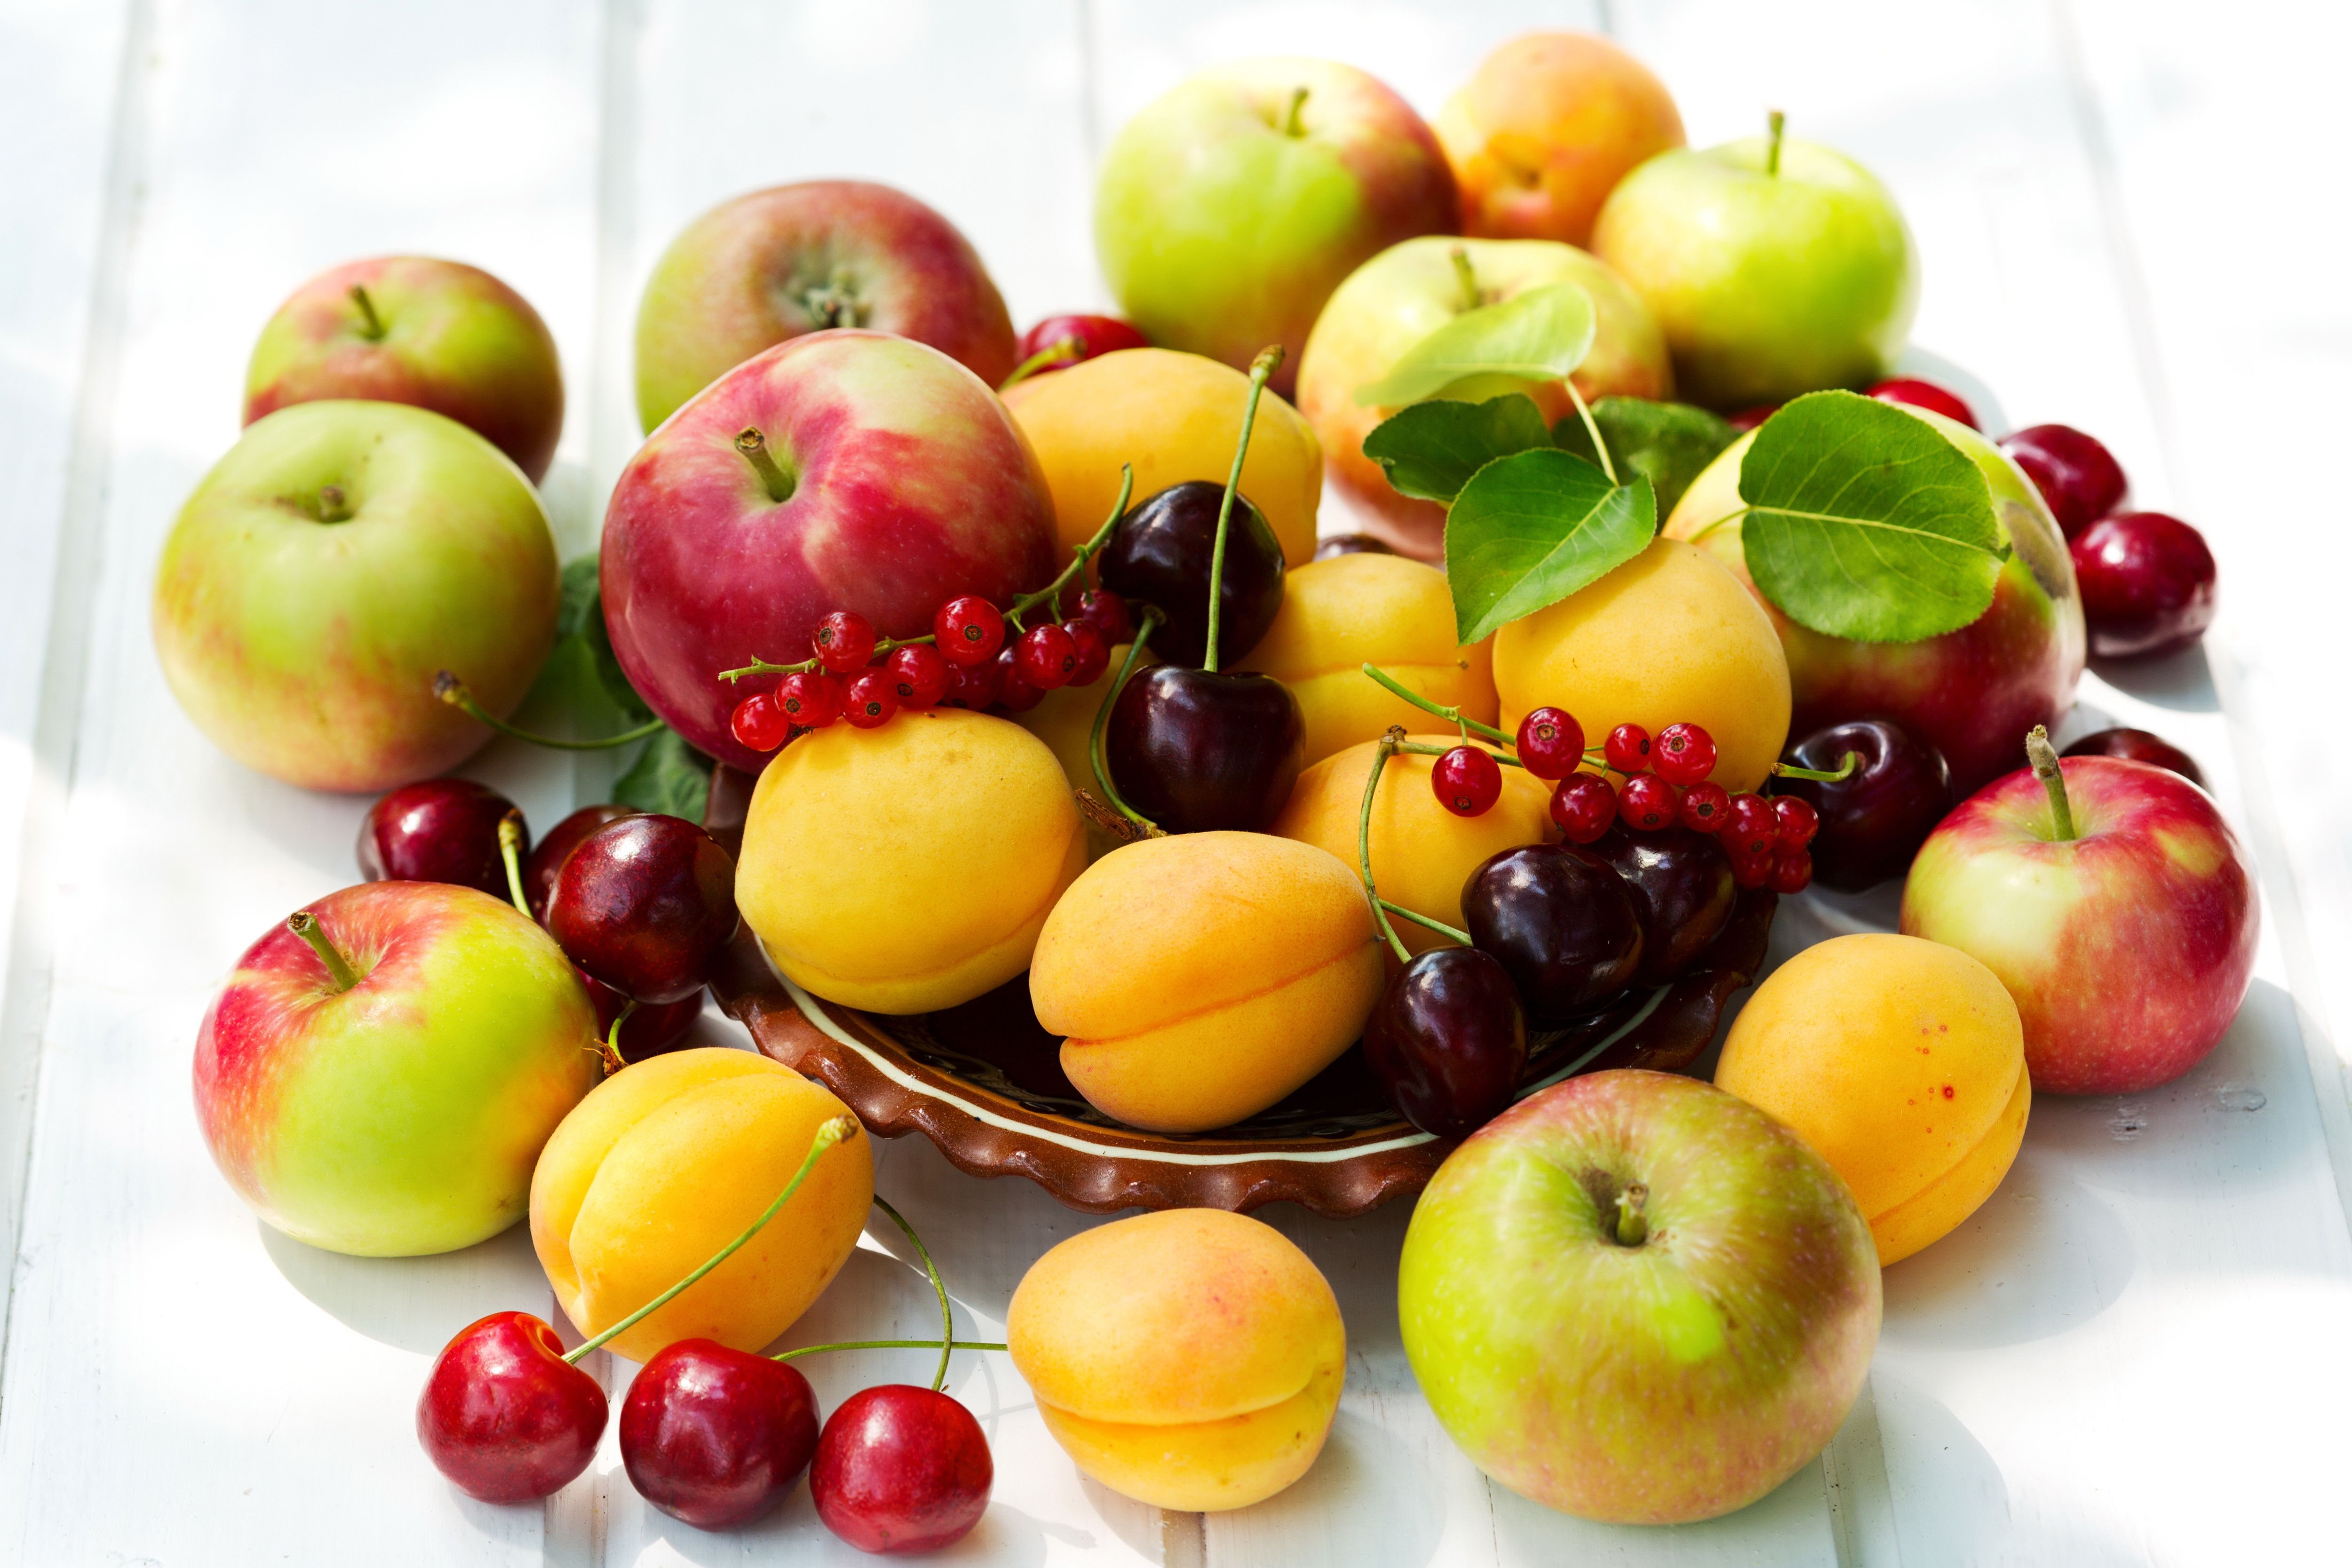 Fruits 4K wallpaper for your desktop or mobile screen free and easy to download